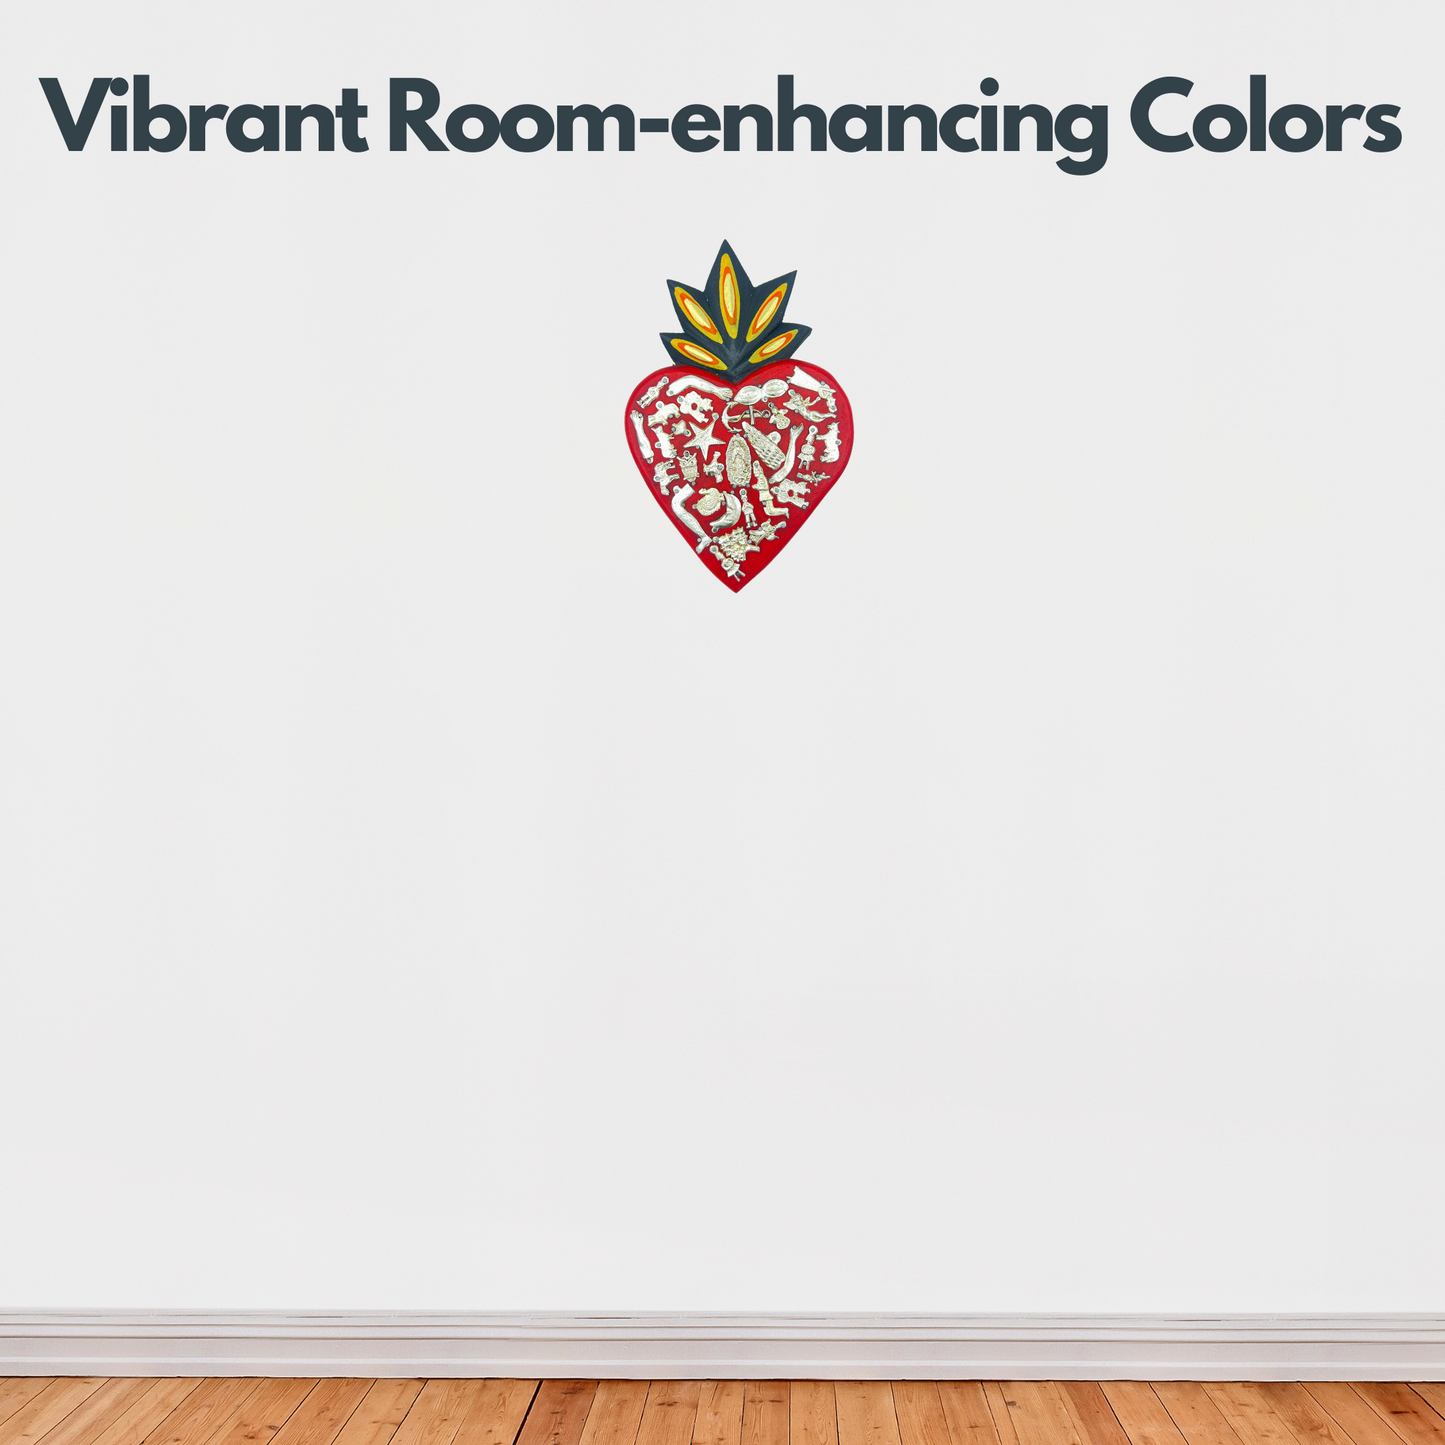 vibrant room-enhancing colors Ex Voto Wooden Sacred Heart, hand-painted by Mexican artisans, featuring colorful milagros, perfect for wall decor and enhancing your space.